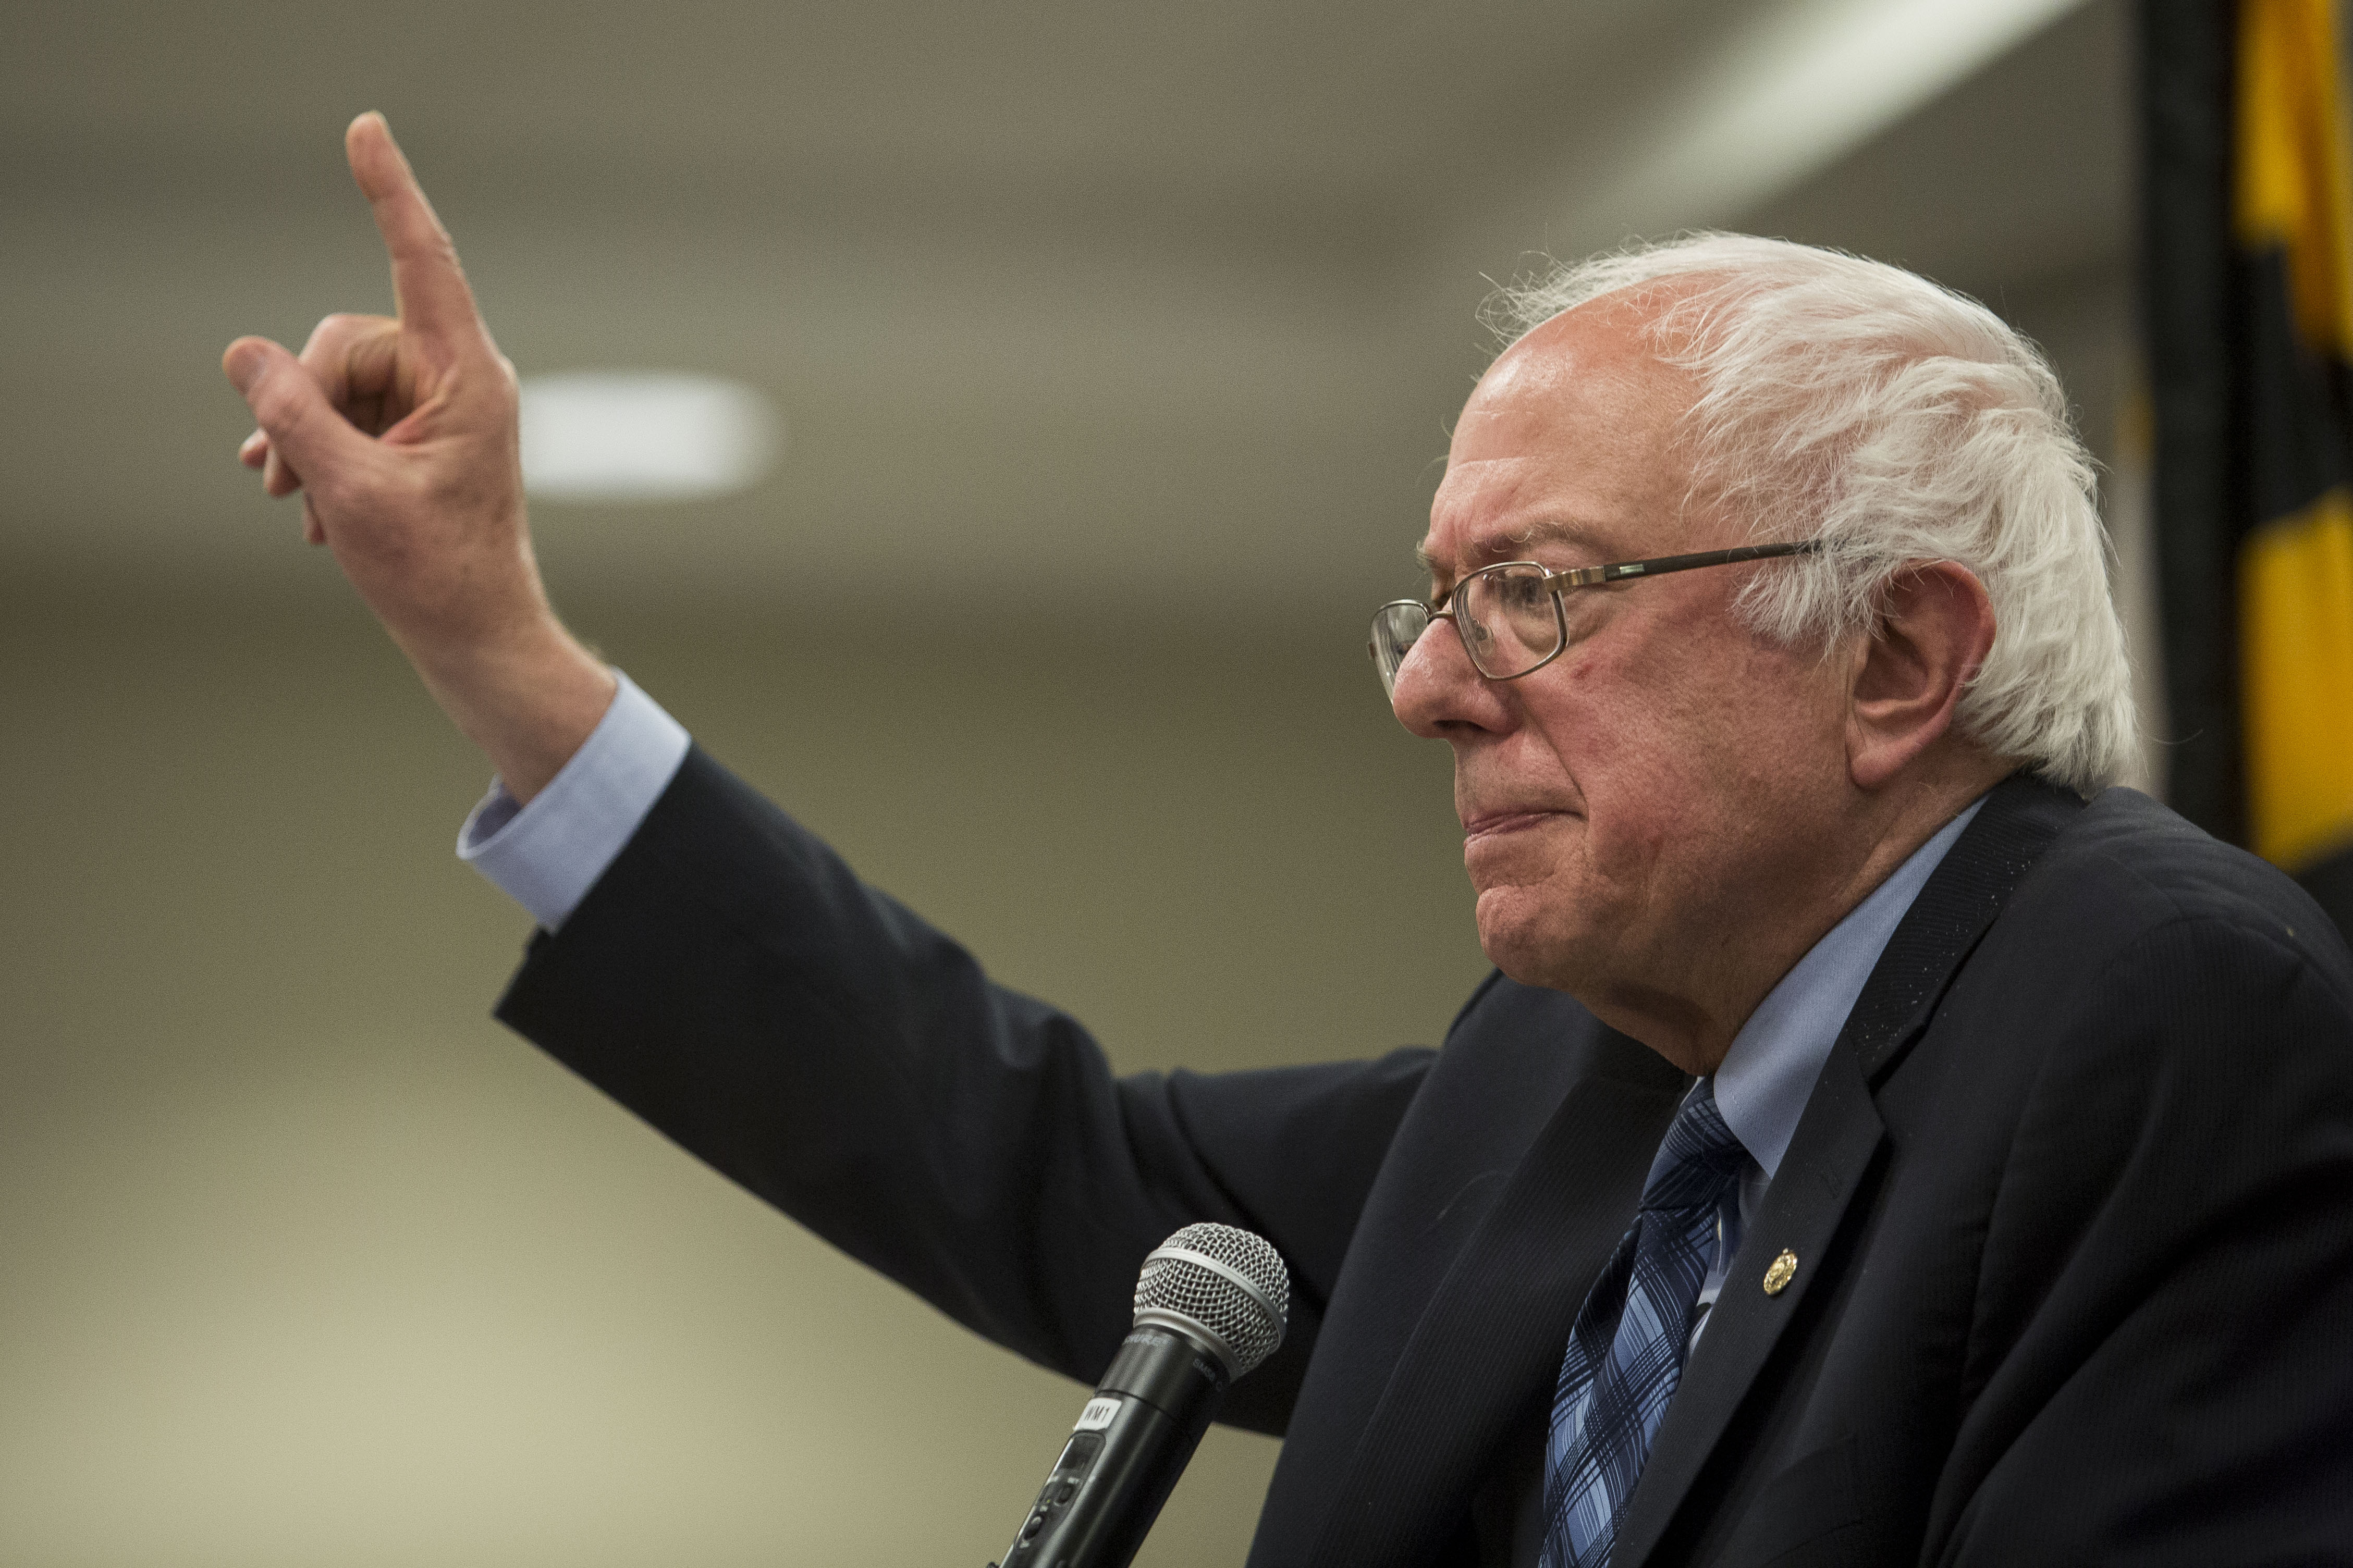 U.S. Sen. Bernie Sanders speaks at a town hall meeting at the International Brotherhood of Electrical Workers Local Union 26 office May 5, 2015 in Lanham, Maryland. (Drew Angerer—Getty Images)